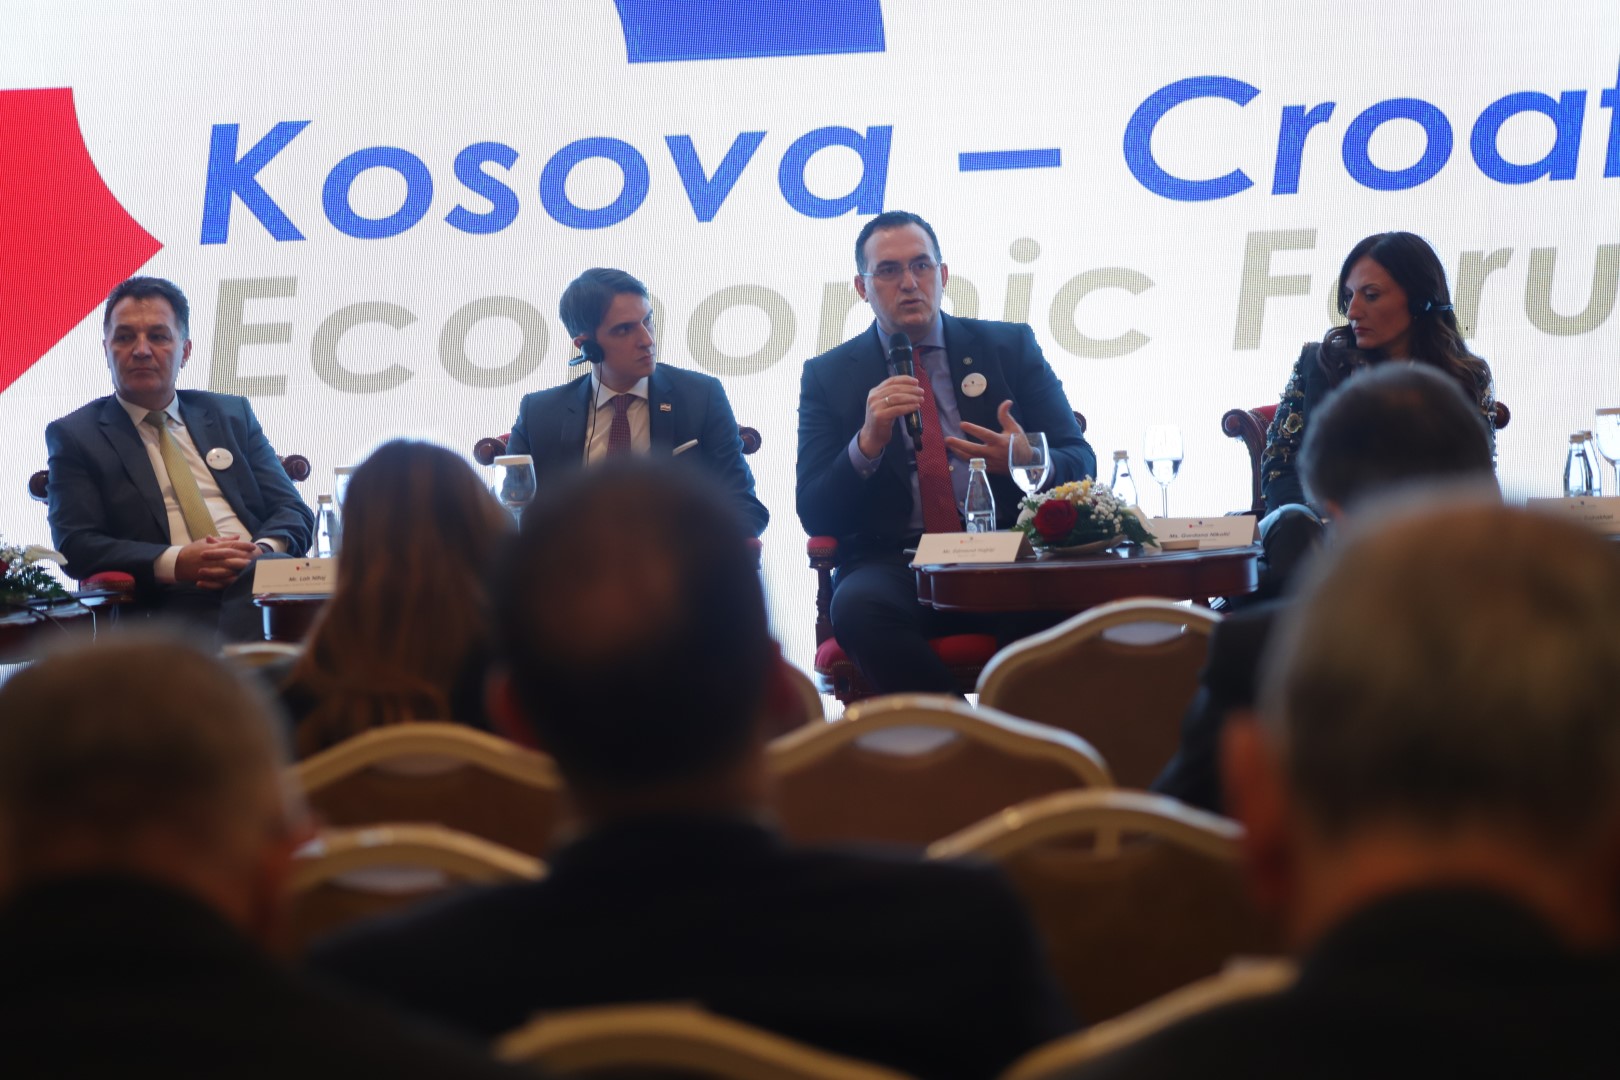 Rector Hajrizi participated in the Kosova – Croatia Economic Forum, where entrepreneurship and labor force needs in the country were discussed